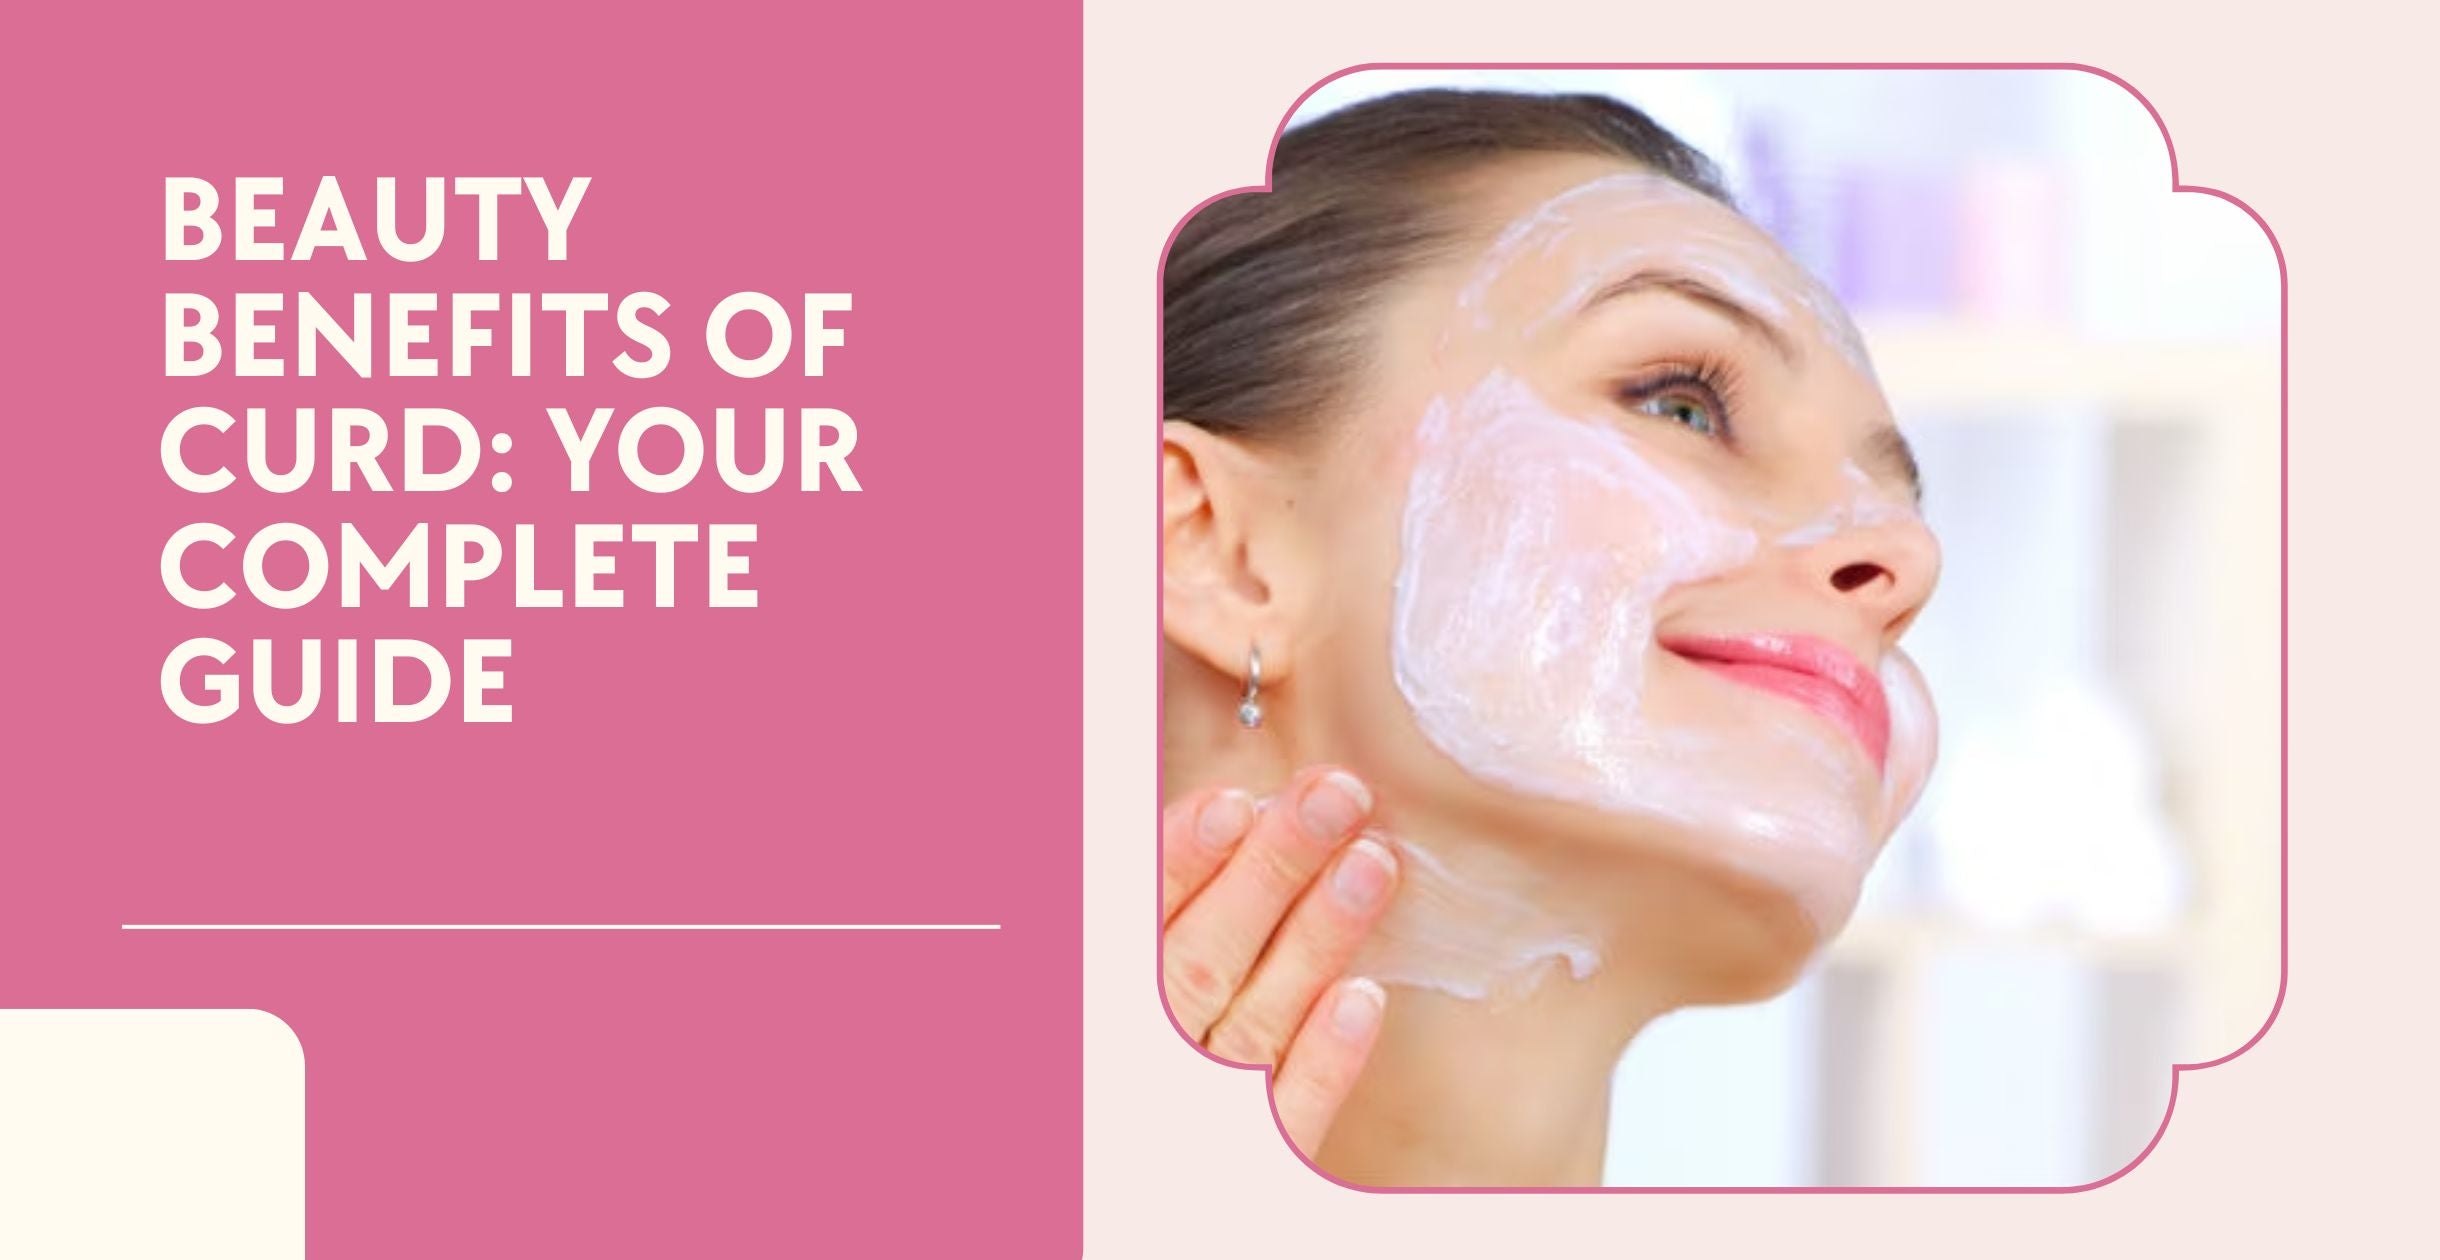 Beauty Benefits of Curd: Your Complete Guide